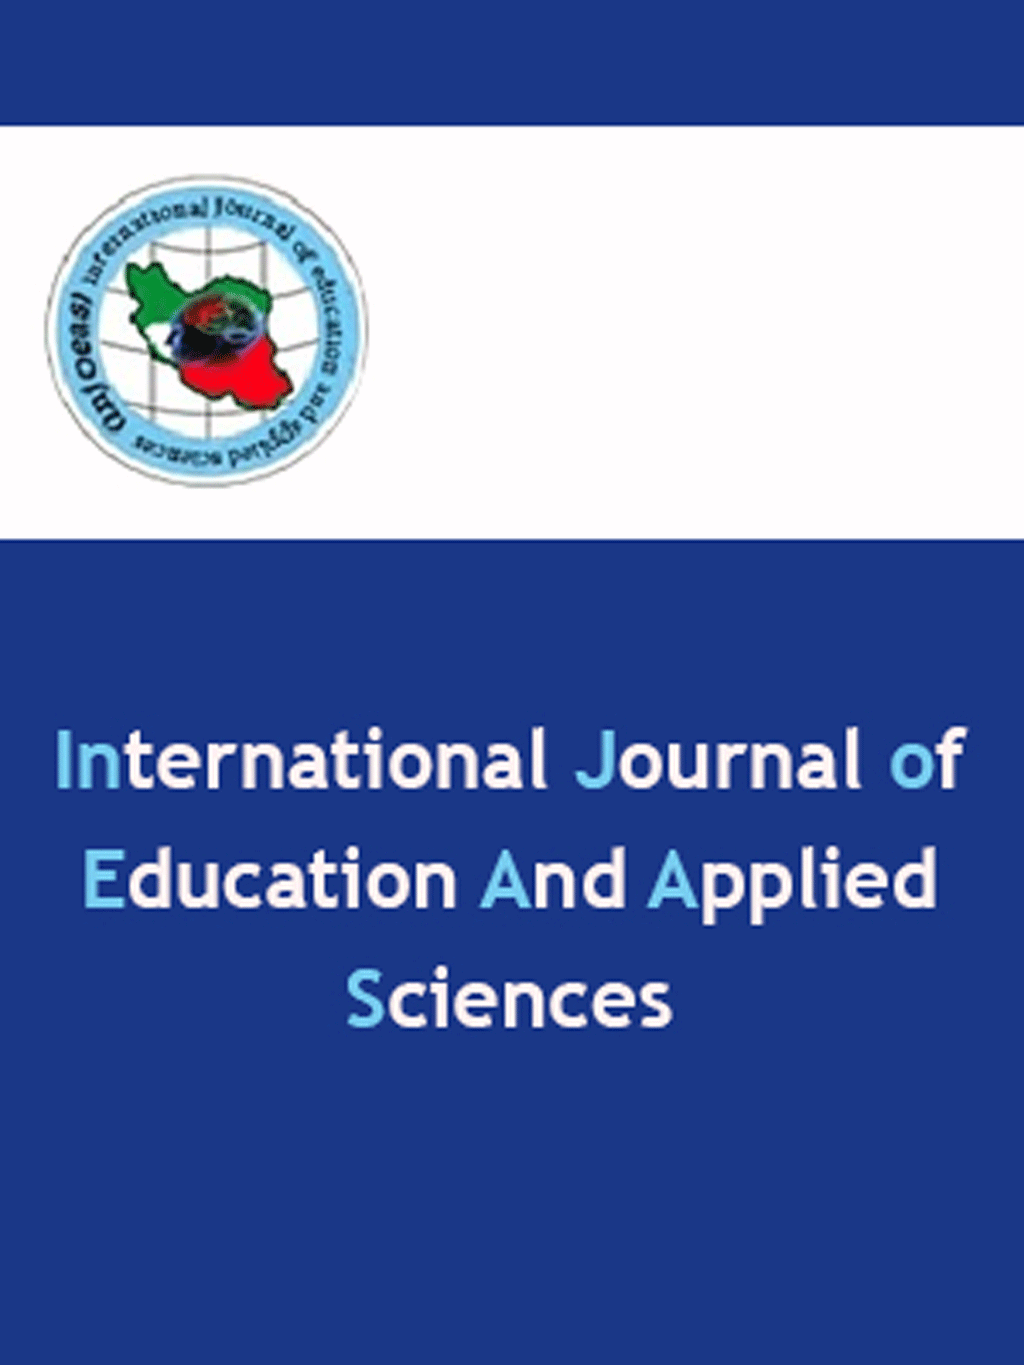 Education and Applied Sciences - April 2021, Volume 2 - Number 1